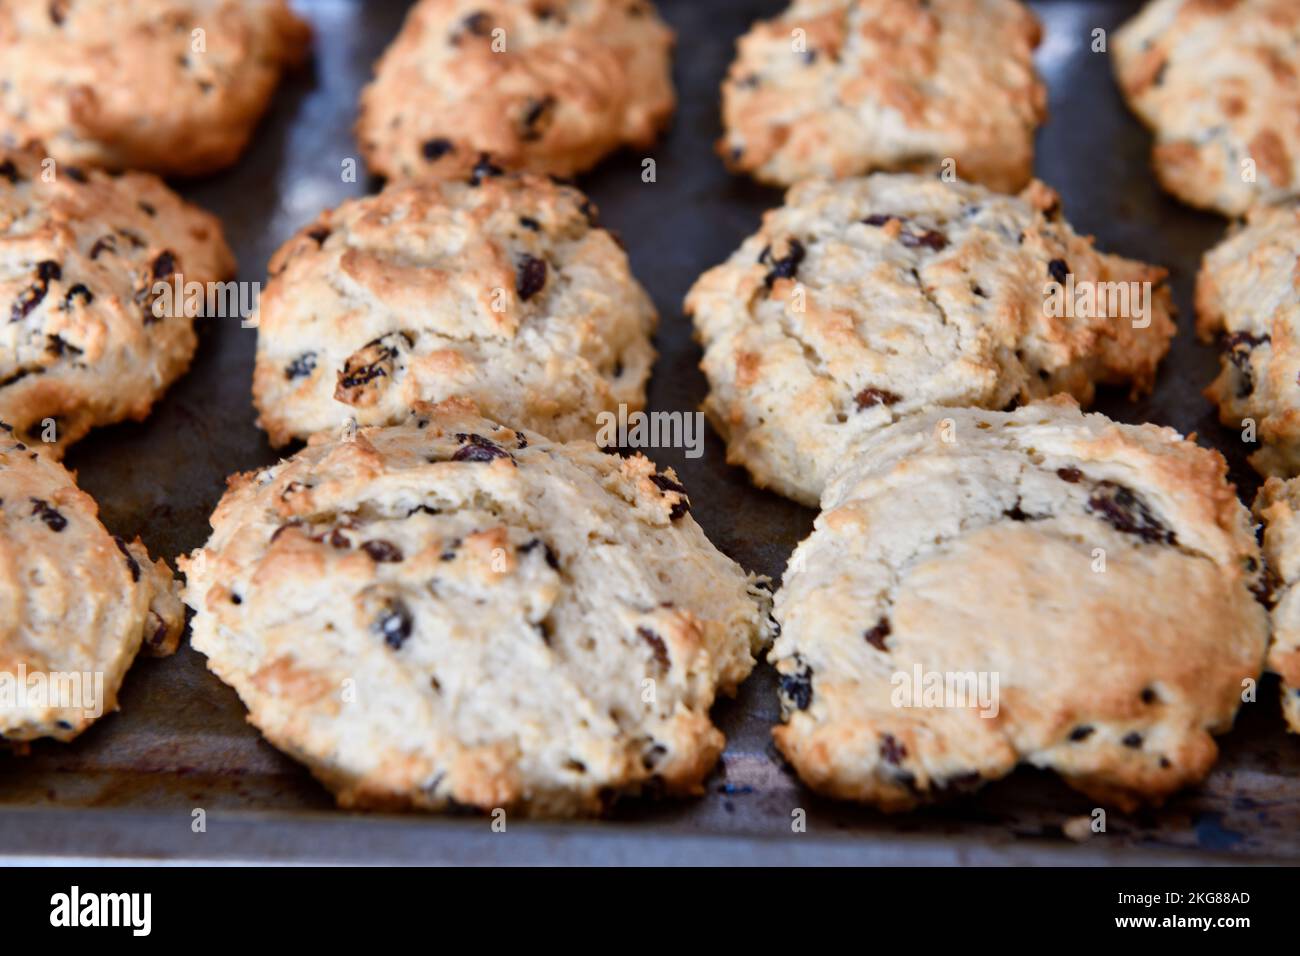 Rock Cakes cooling on wire tray in kitchen Hook Norton Oxfordshire England uk Stock Photo